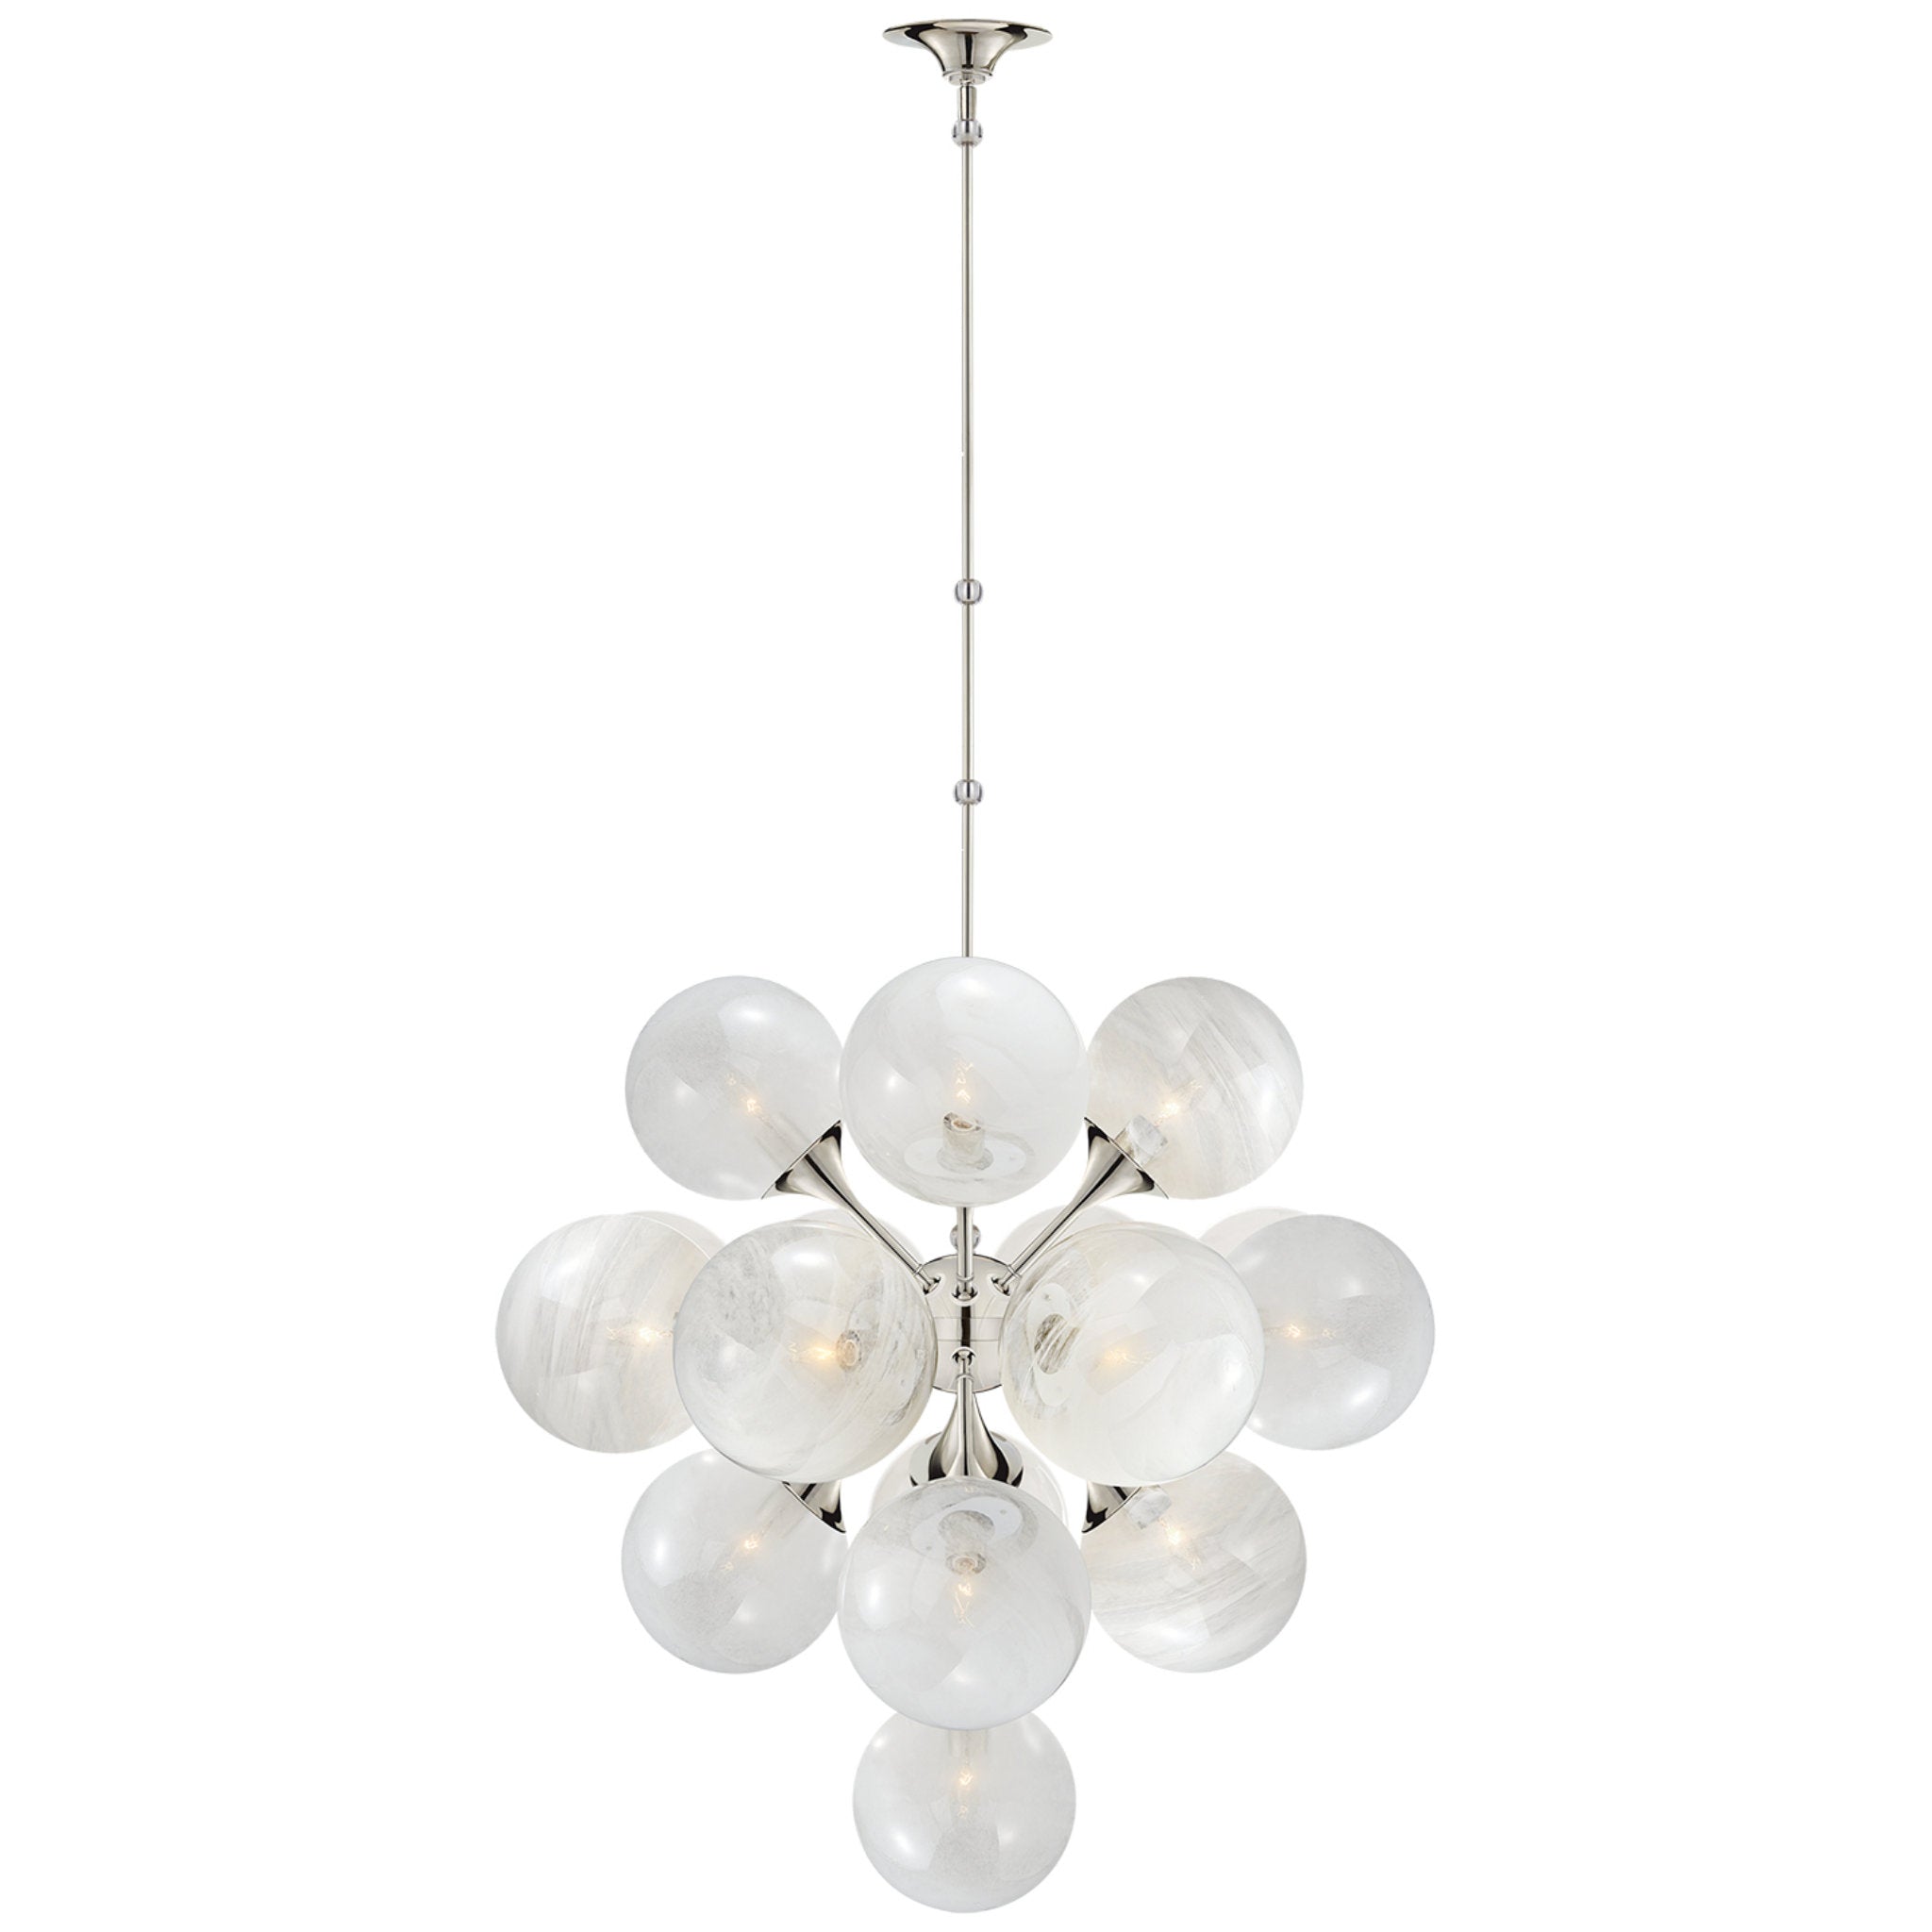 AERIN Cristol Large Tiered Chandelier in Polished Nickel with White Strie Glass